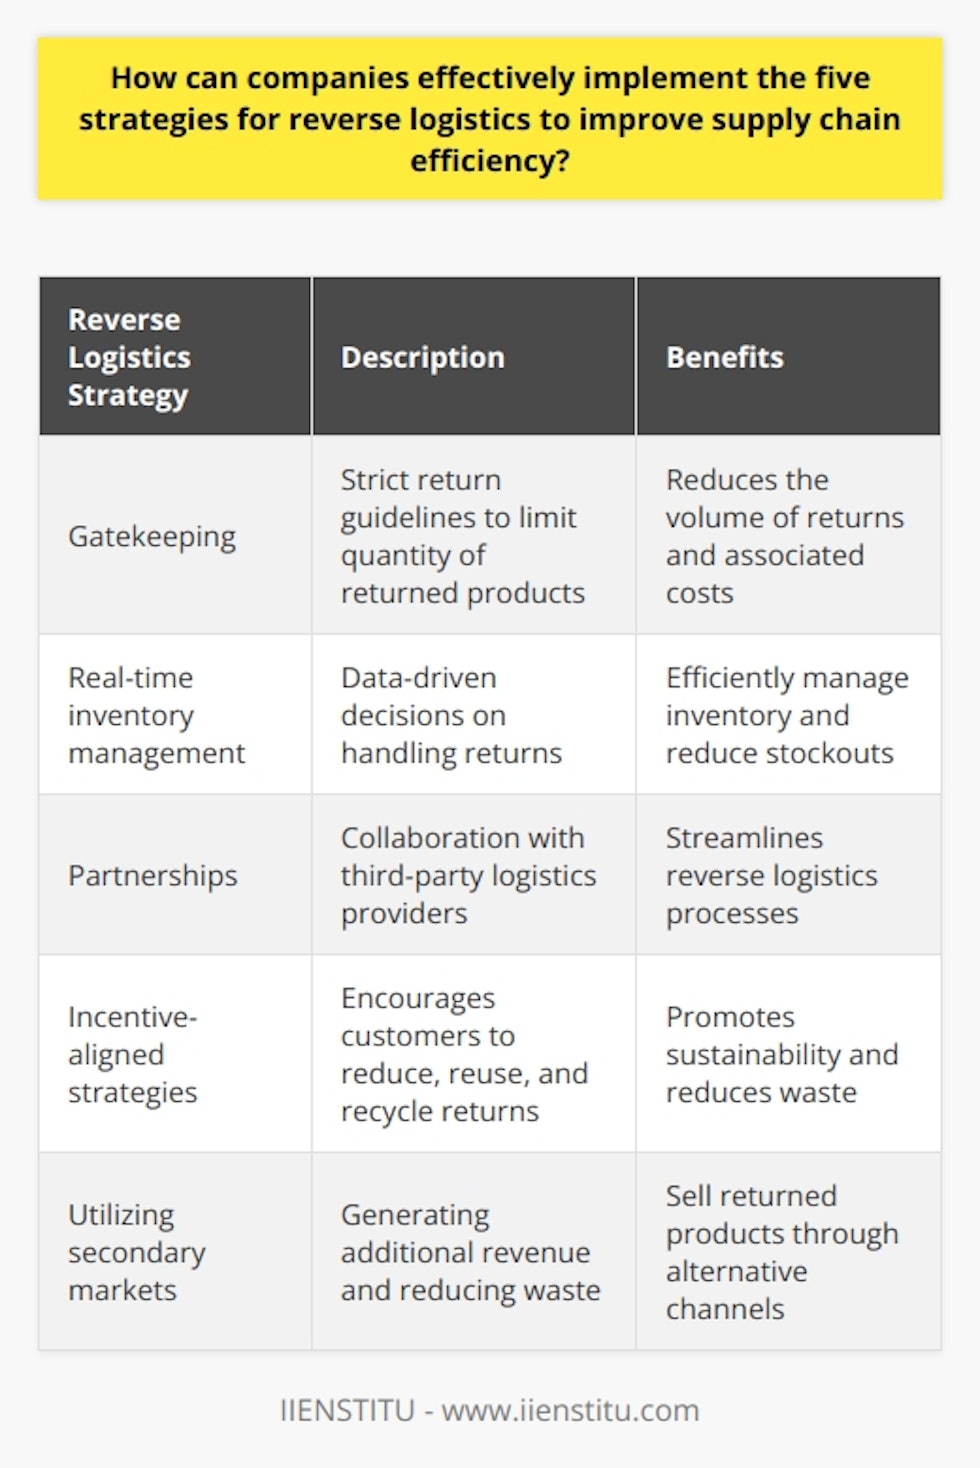 To summarize, the five strategies for reverse logistics that can help improve supply chain efficiency are gatekeeping, real-time inventory management, partnerships, incentive-aligned strategies, and utilizing secondary markets. Gatekeeping involves strict return guidelines to limit the quantity of returned products. Real-time inventory management allows companies to make data-driven decisions on how to handle returns. Partnerships with 3PLs can streamline reverse logistics processes. Incentive-aligned strategies encourage customers to reduce, reuse, and recycle returned products. Lastly, utilizing secondary markets can generate additional revenue and reduce waste. By effectively implementing these strategies, businesses can enhance their overall supply chain efficiency.